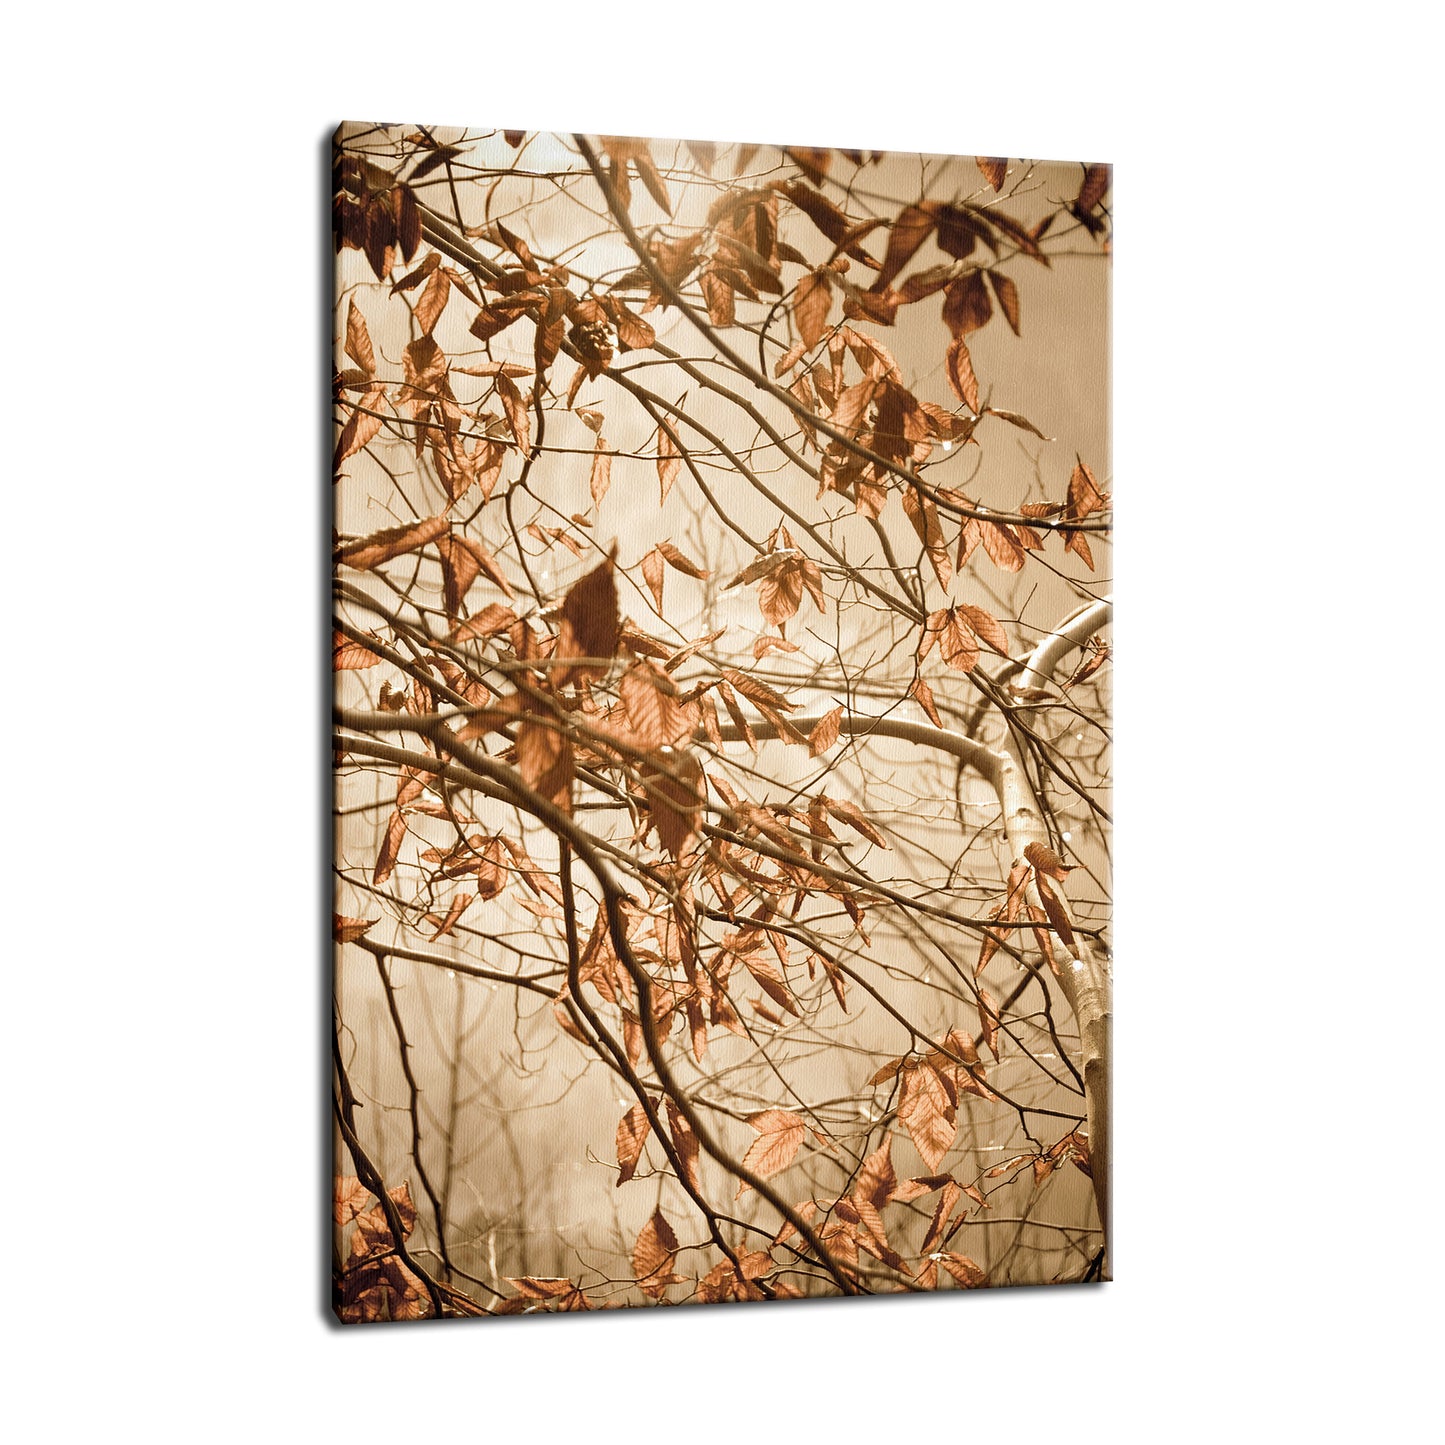 Modern Rustic Wall Decor: Aged Winter Leaves Botanical / Nature Photo Fine Art Canvas Wall Art Prints  - PIPAFINEART